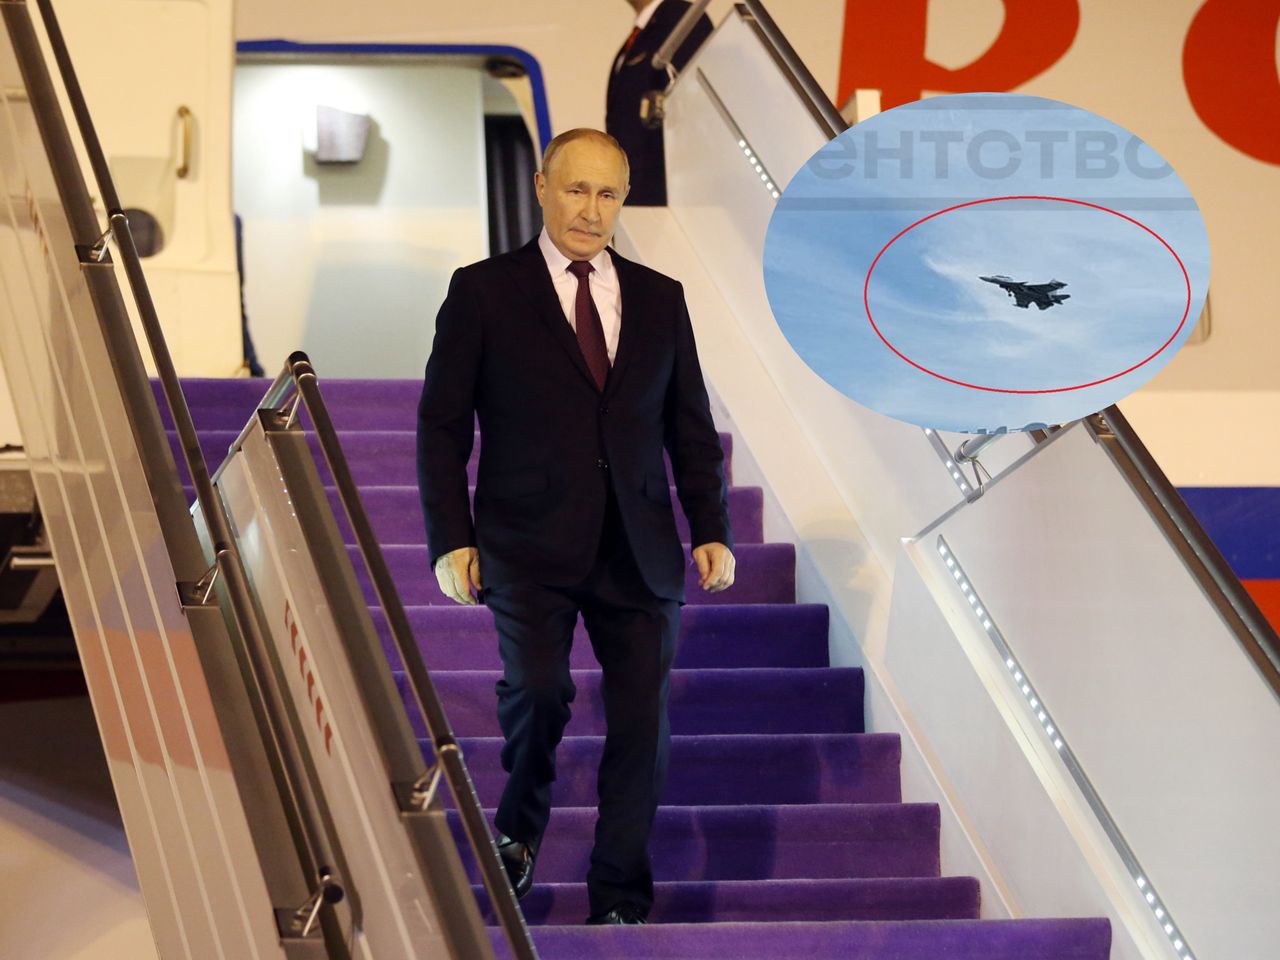 Putin's fighter jet escort sparks speculation of fear and insecurity